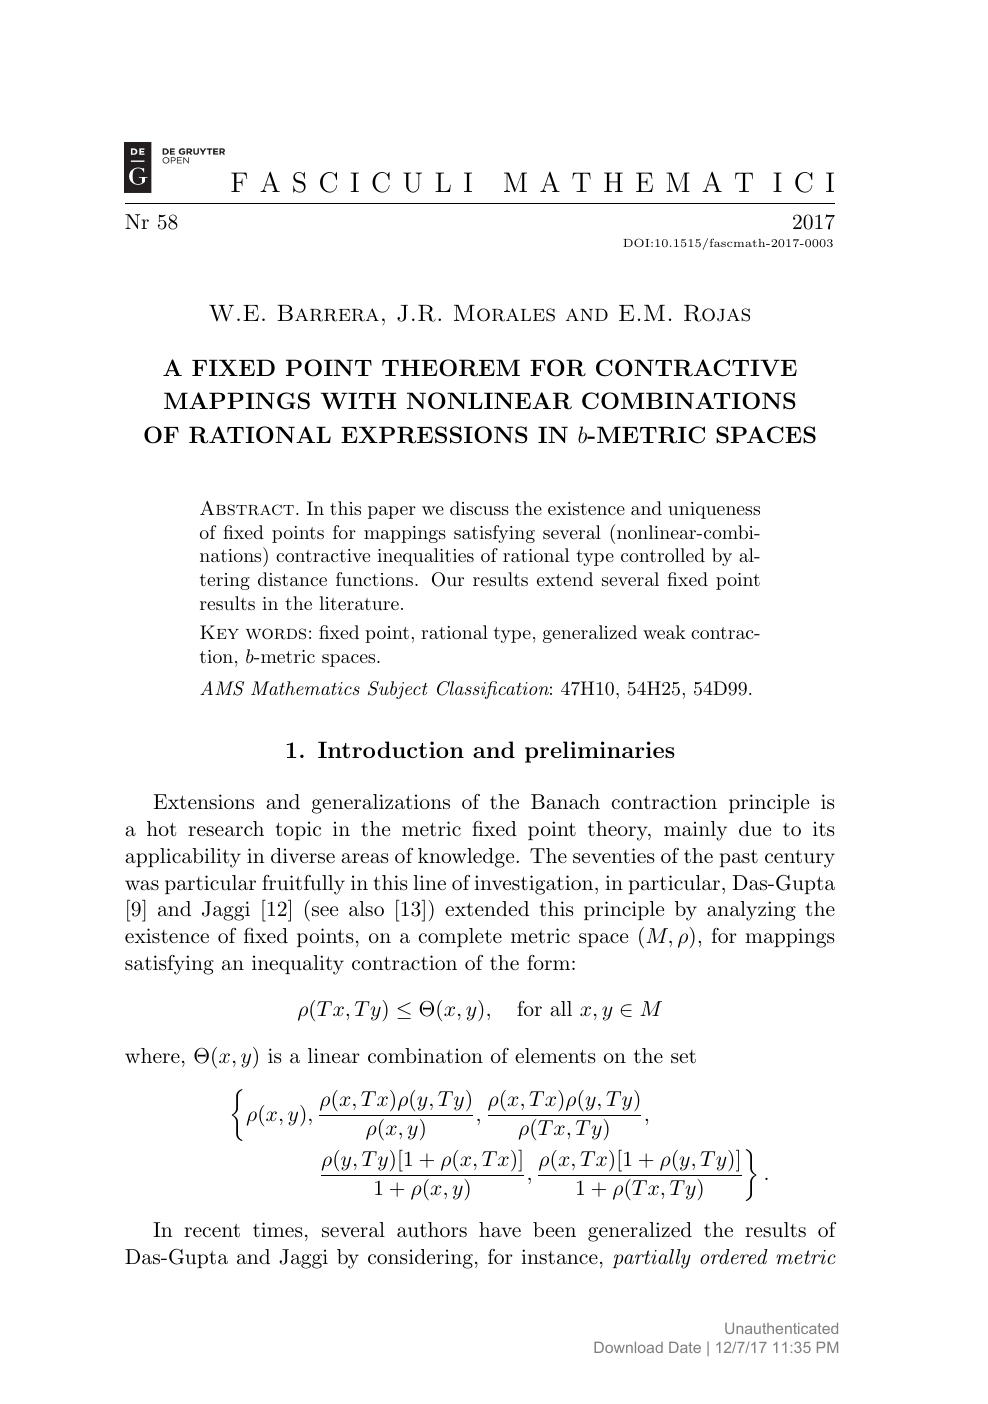 A Fixed Point Theorem For Contractive Mappings With Nonlinear Combinations Of Rational Expressions In B Metric Spaces Topic Of Research Paper In Mathematics Download Scholarly Article Pdf And Read For Free On